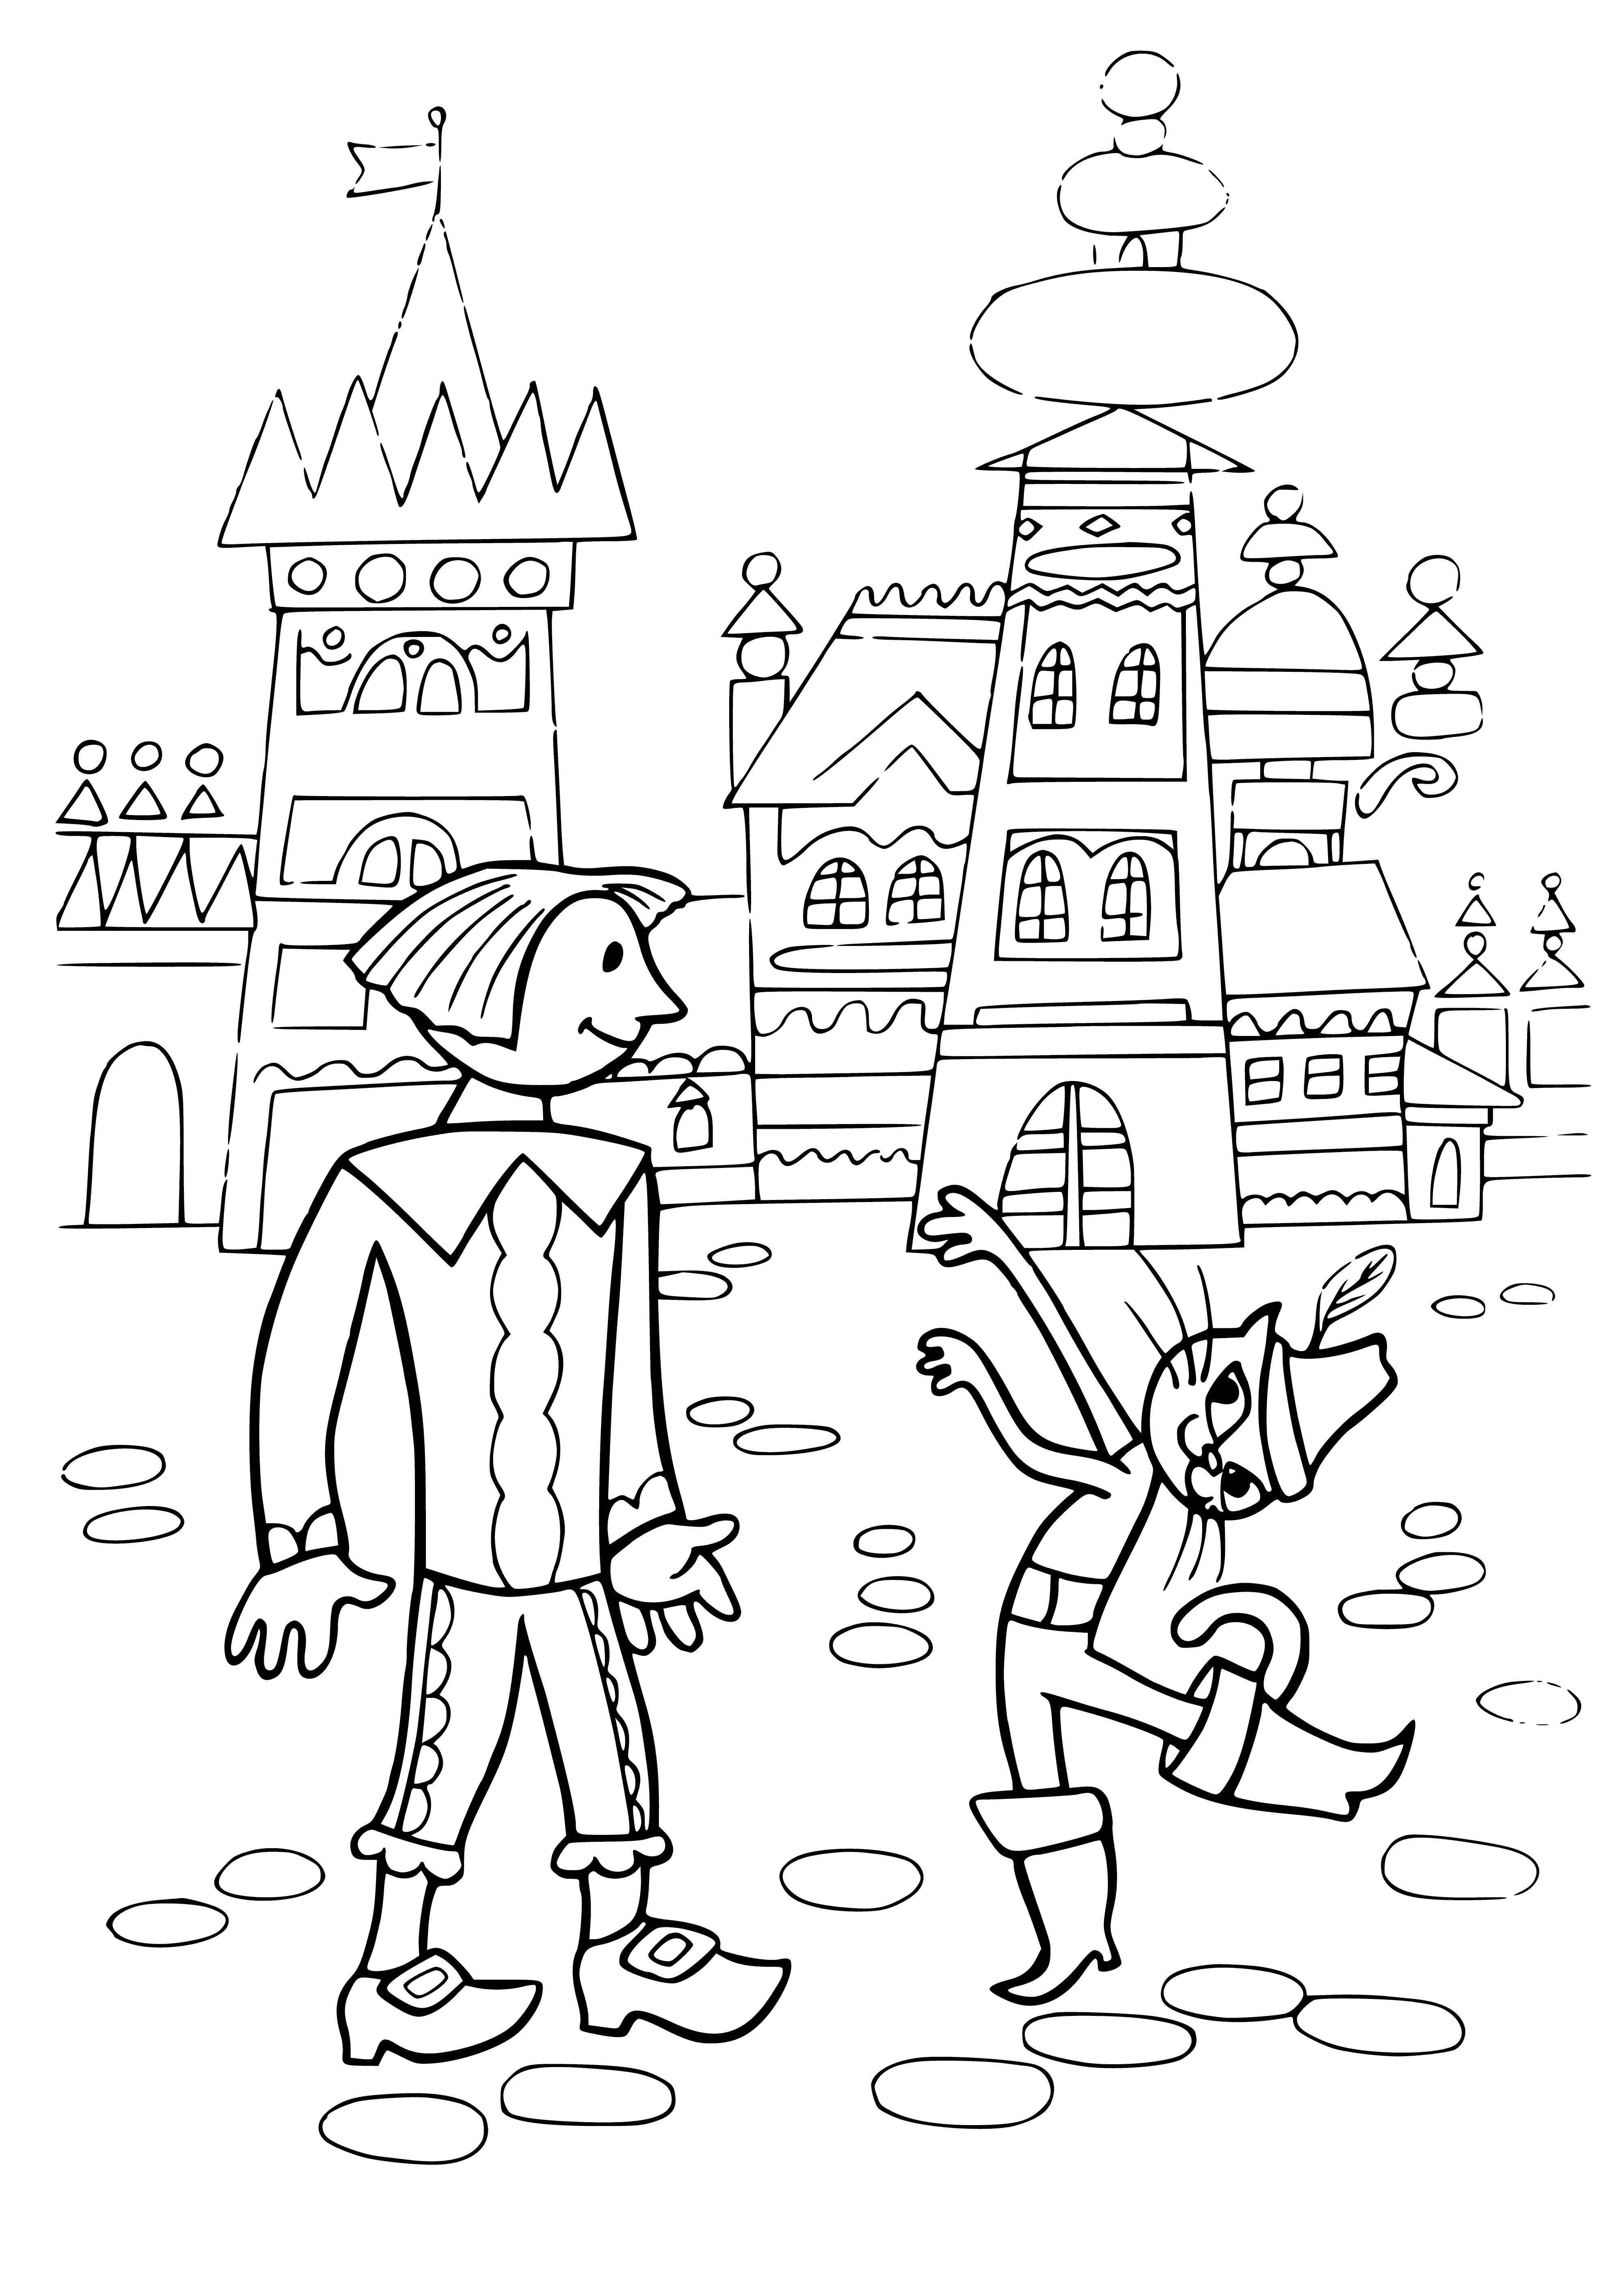 coloring page: Man with hat & overcoat cuddles scruffy cat in front of intimidating castle. He smiles, cat stares wide-eyed.